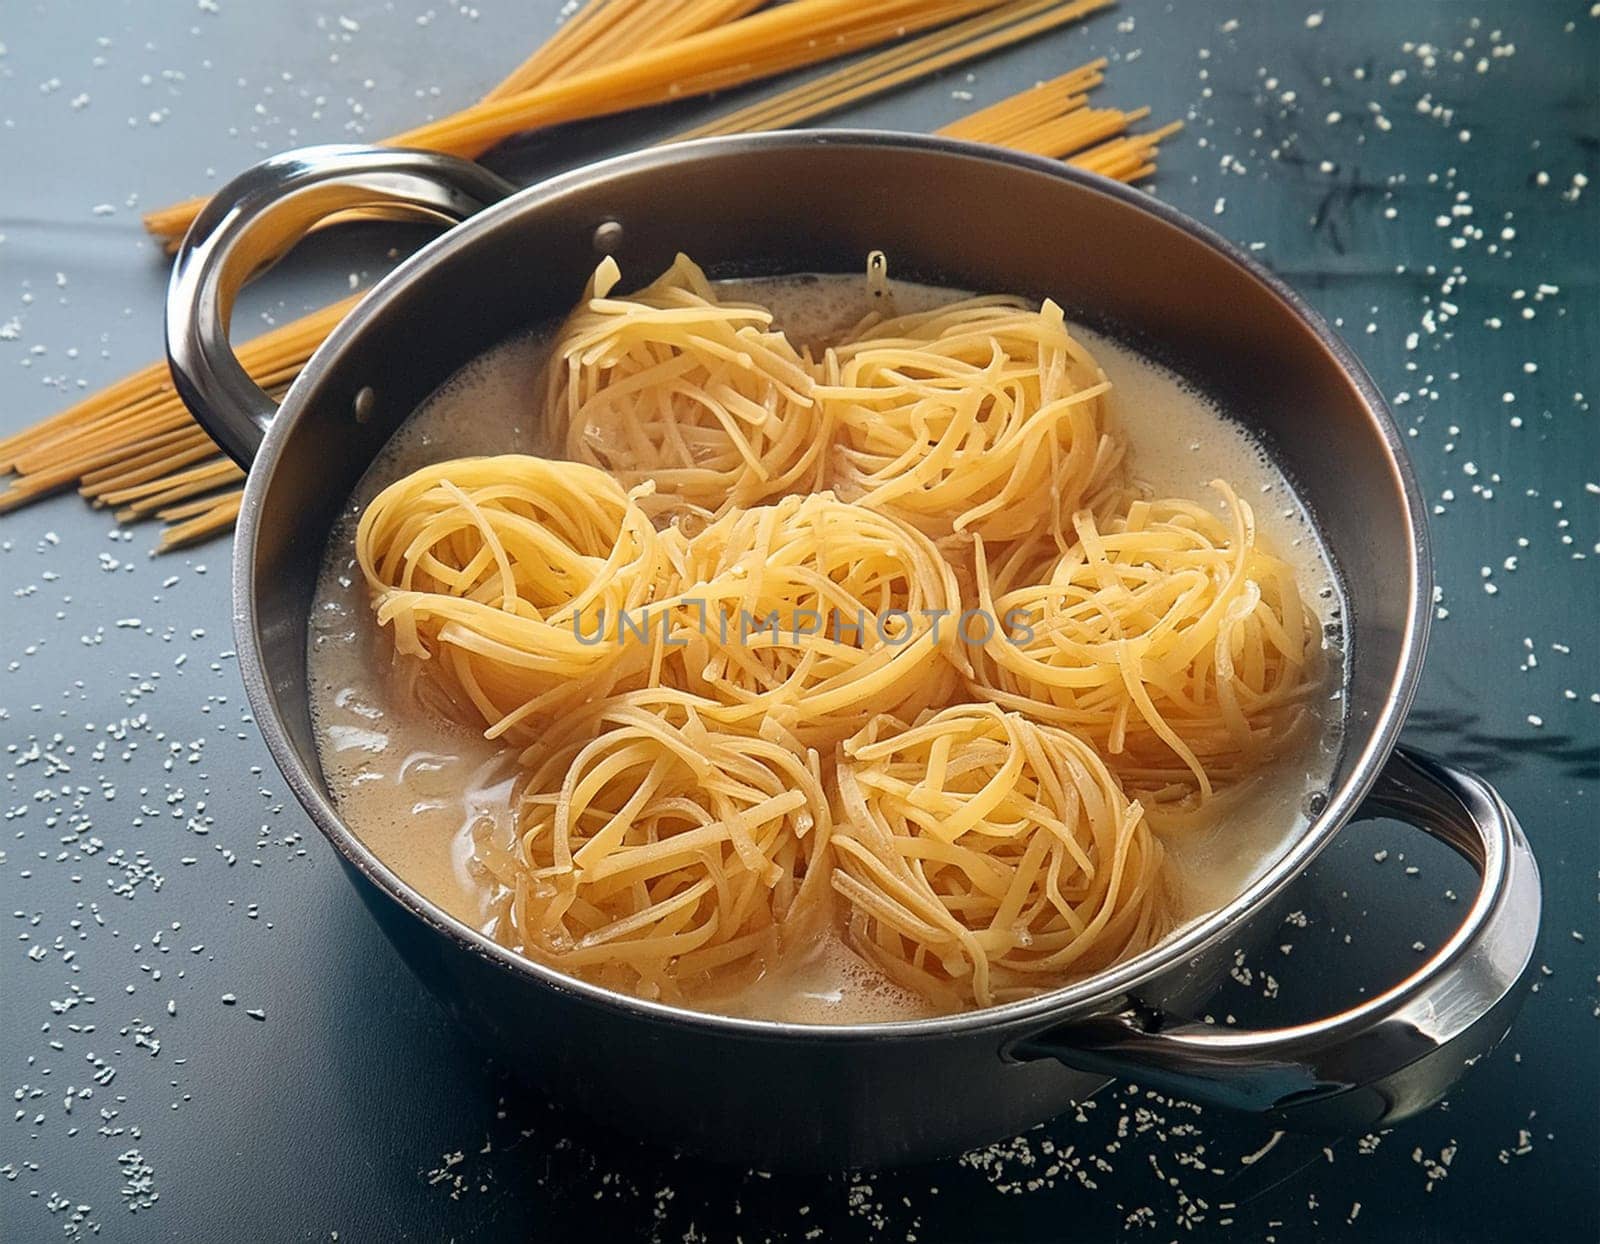 Italian spaghetti, cooked by JFsPic